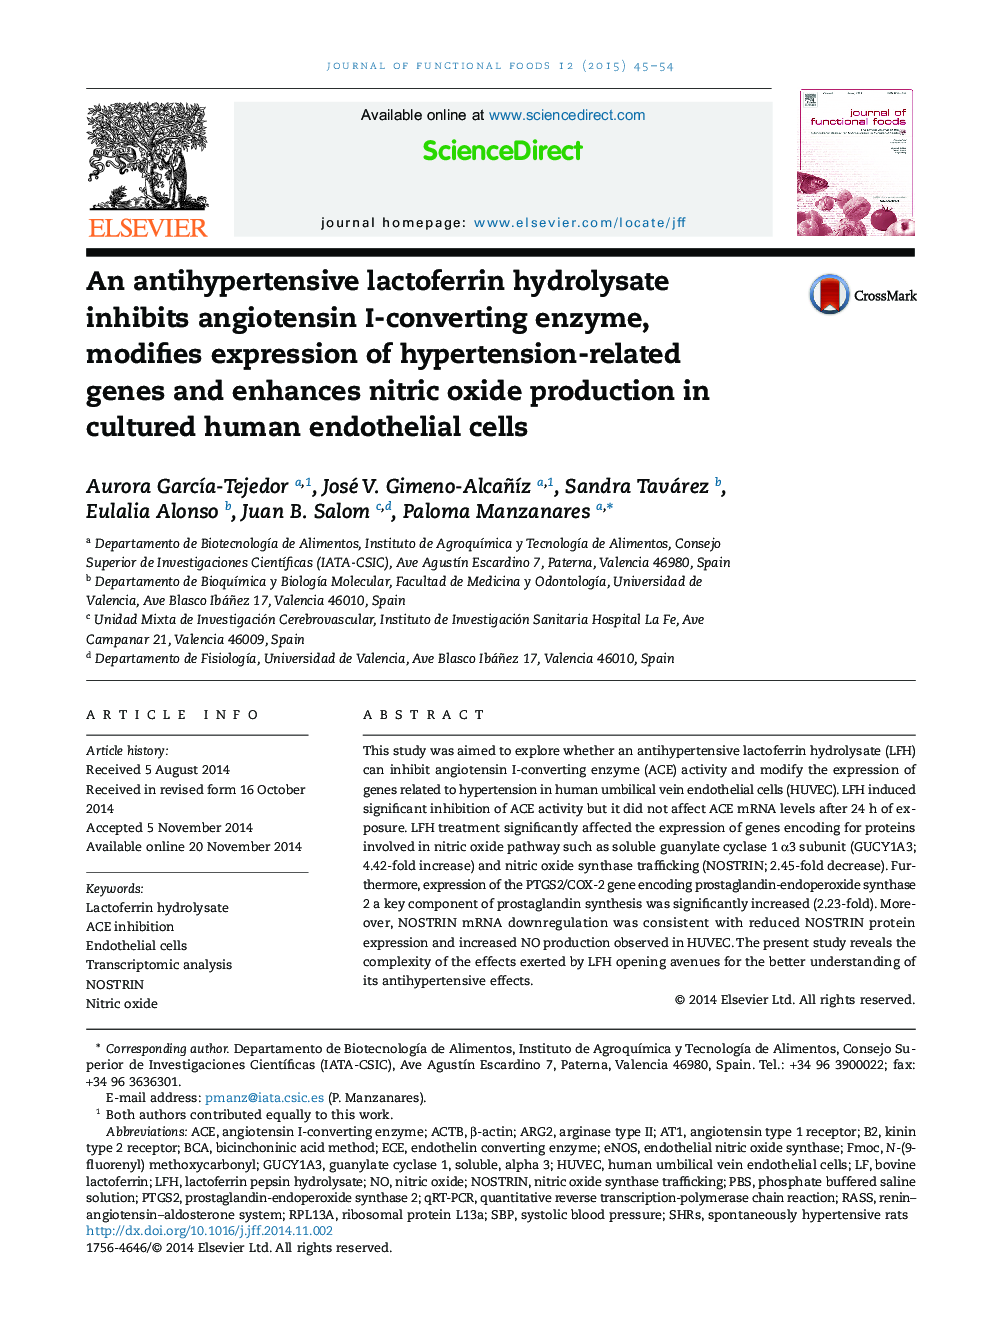 An antihypertensive lactoferrin hydrolysate inhibits angiotensin I-converting enzyme, modifies expression of hypertension-related genes and enhances nitric oxide production in cultured human endothelial cells